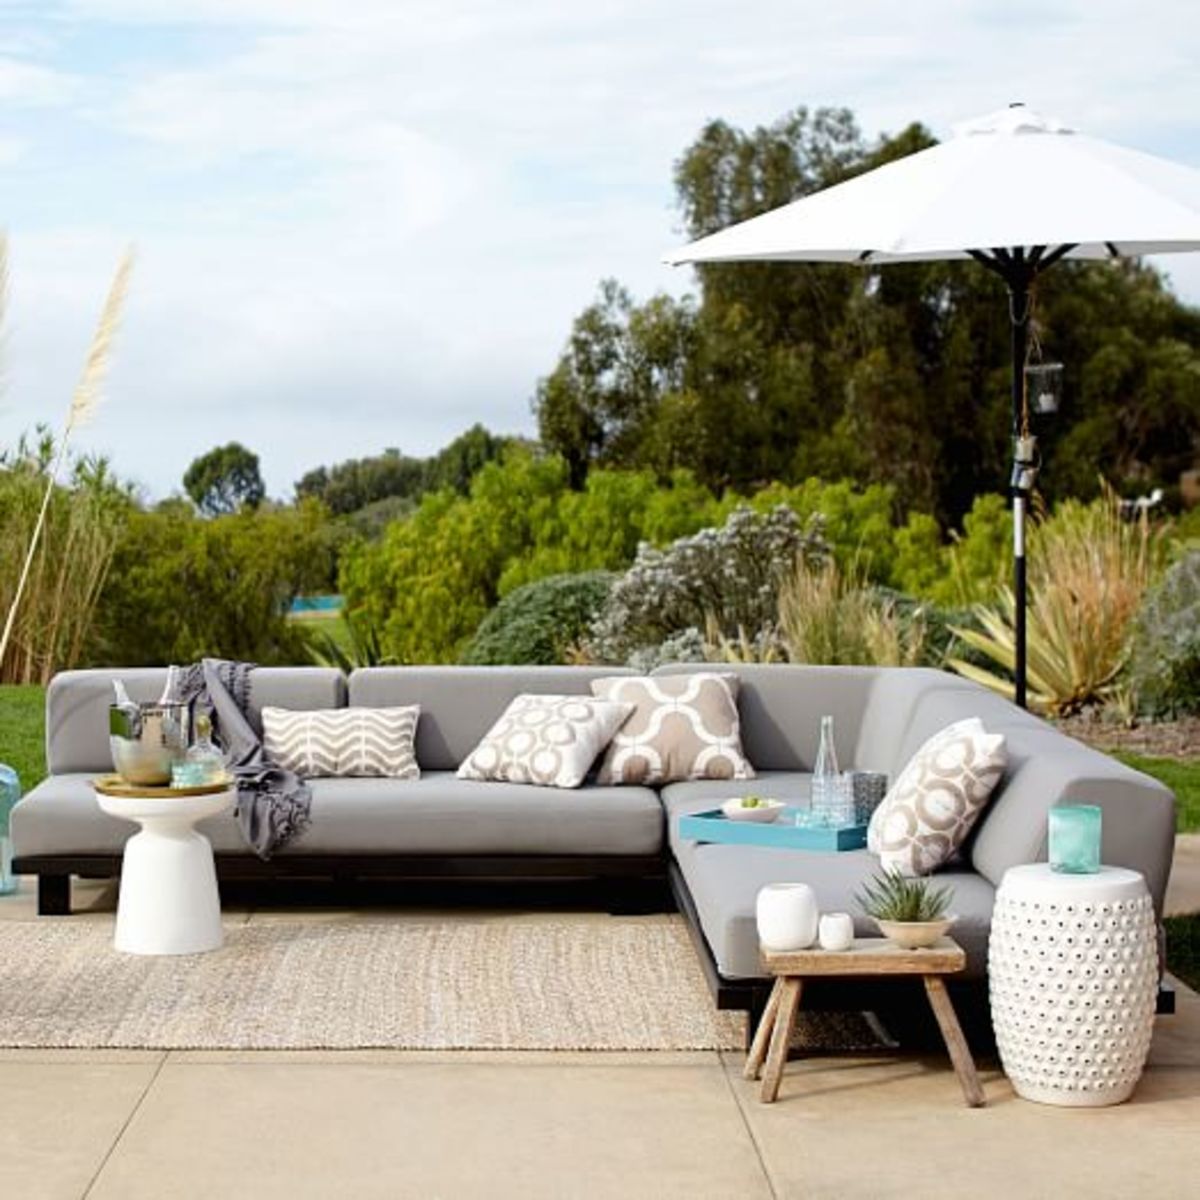 Outdoor living for spring.